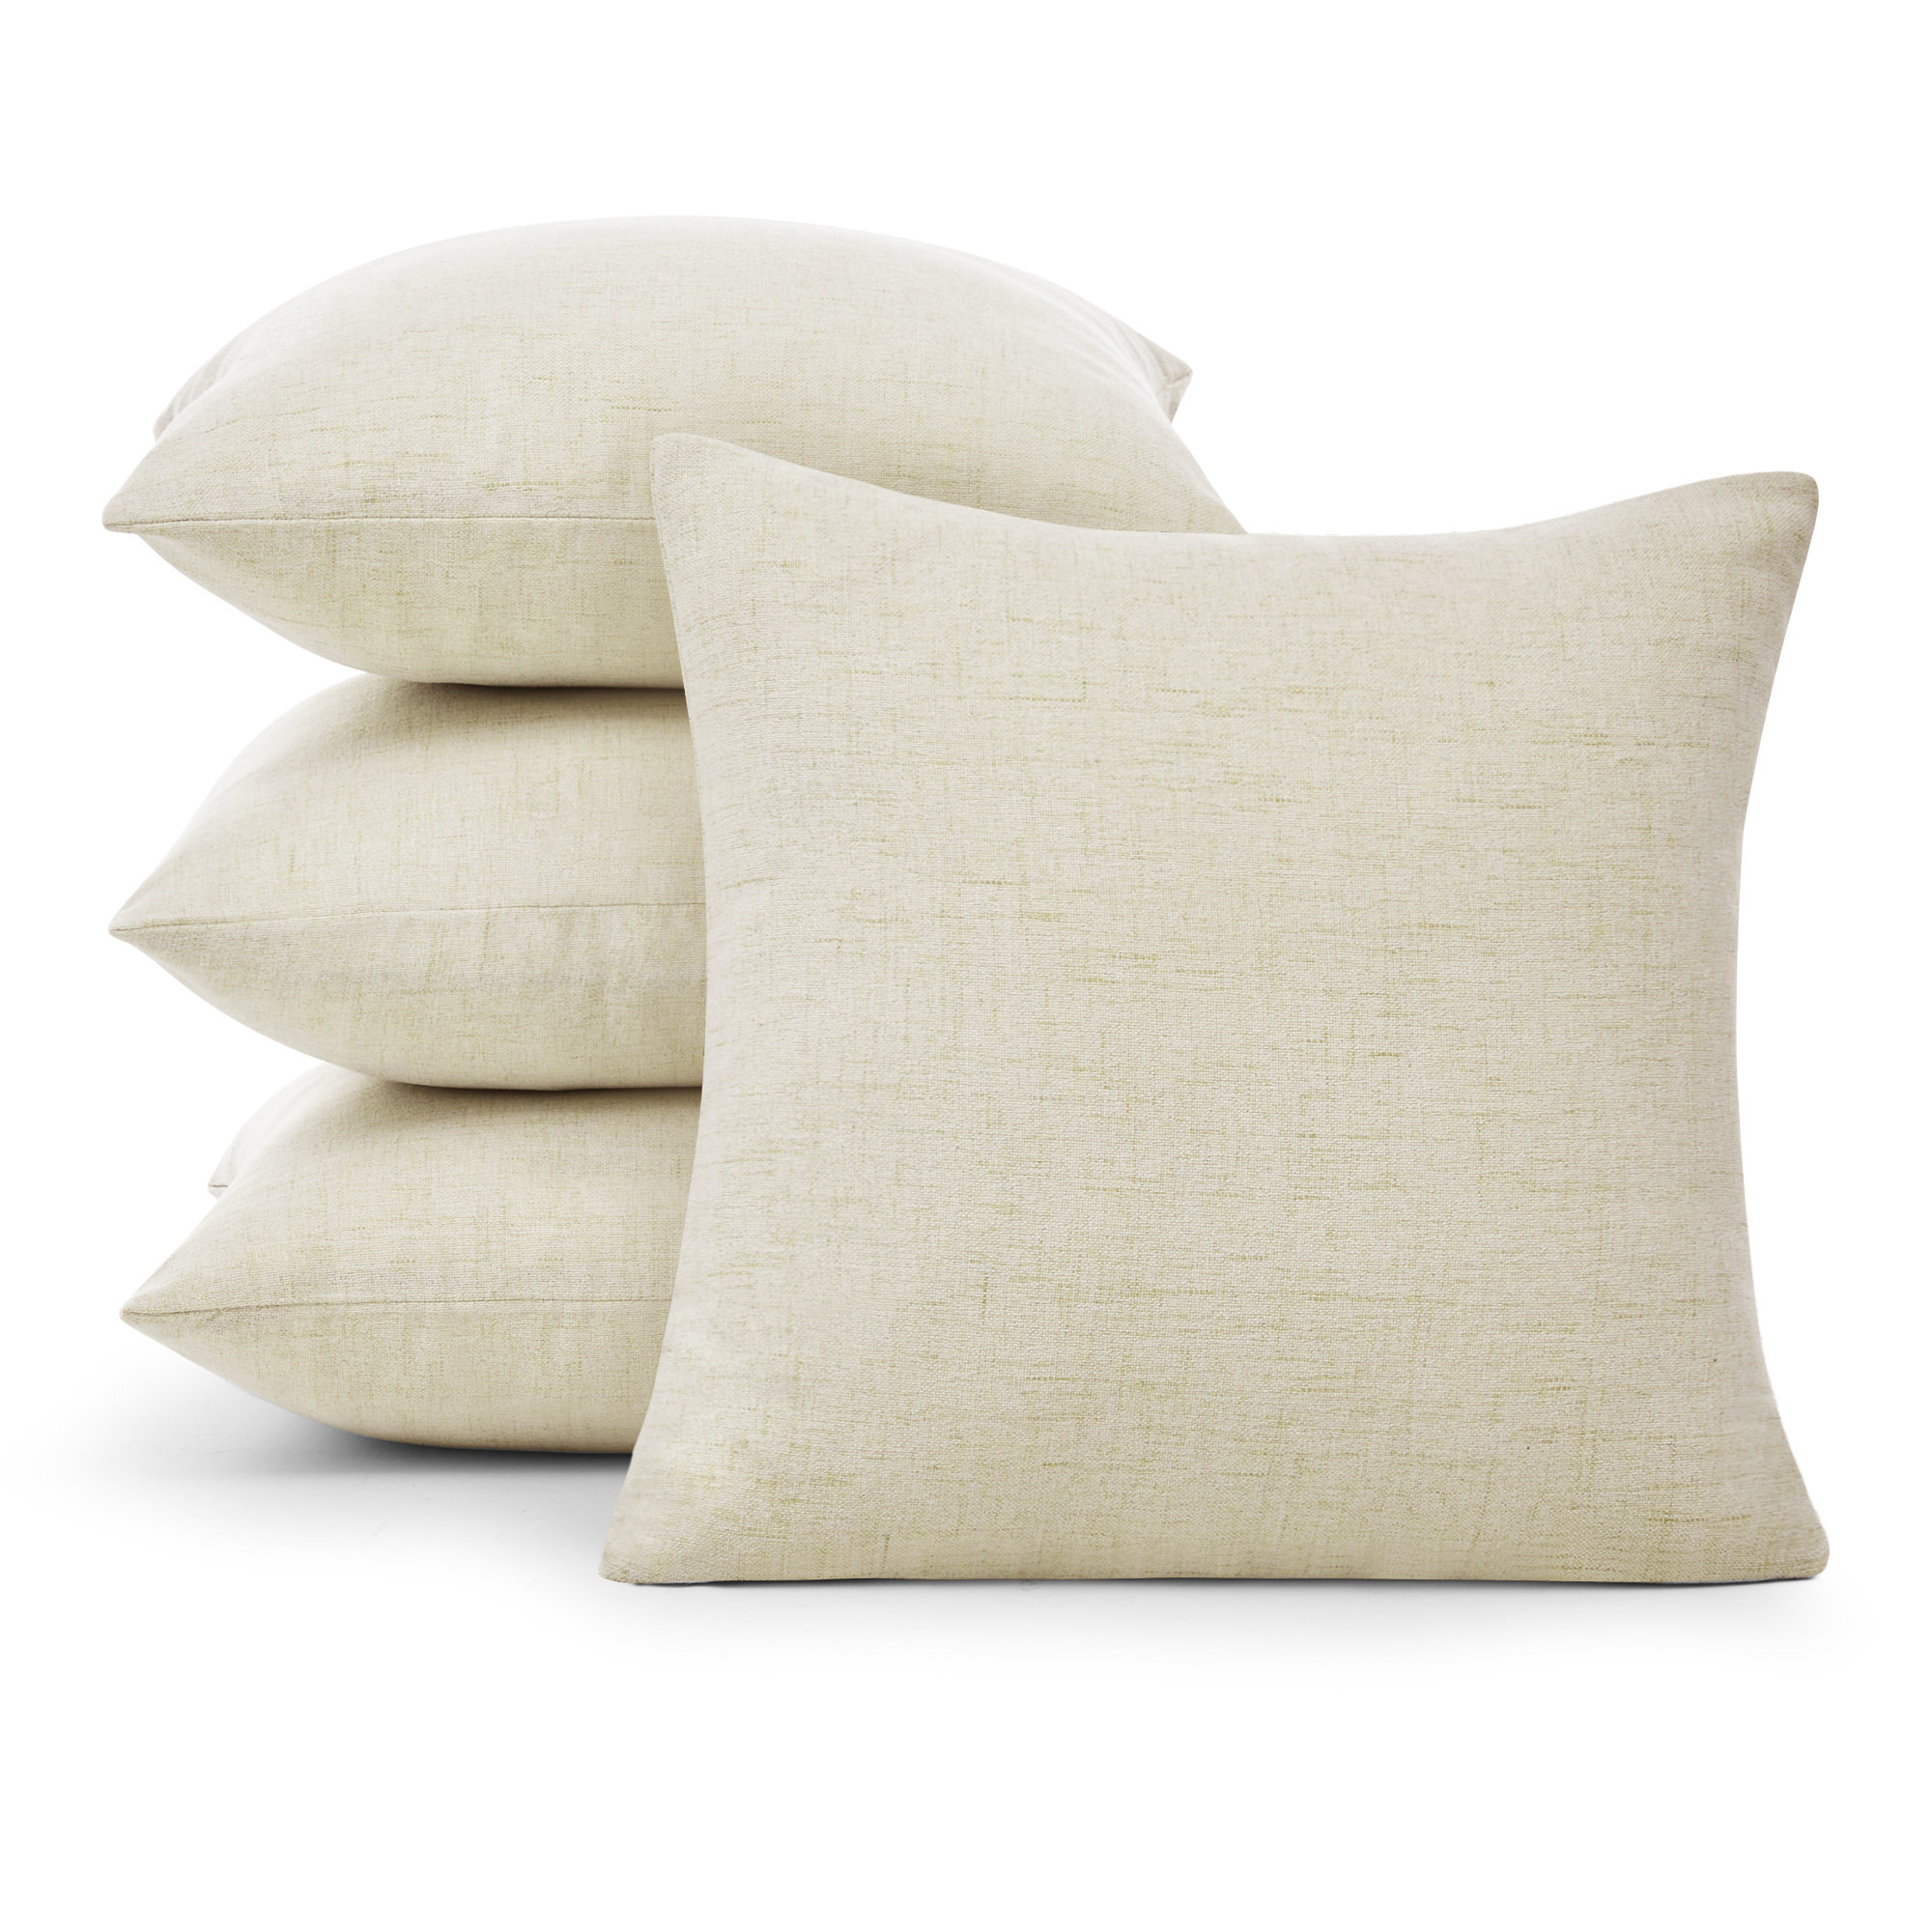 Erion Outdoor Square Pillow Insert  Throw pillow inserts, Couch pillow  sets, Throw pillows bed